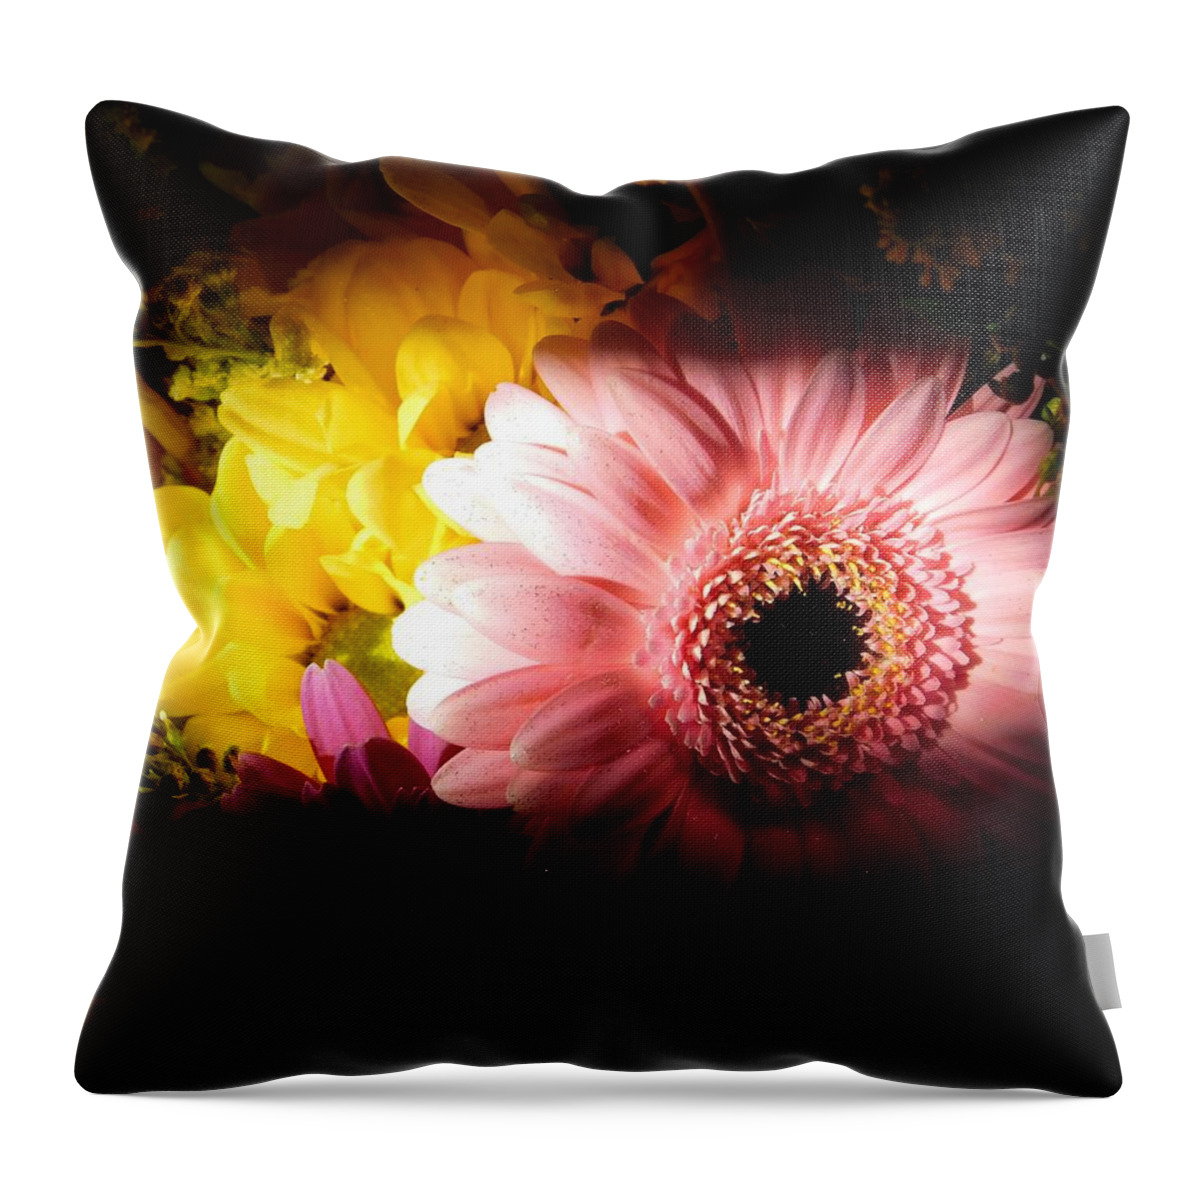 - Pink Gerbera Daisy- Yellow Daisy - In The Light Throw Pillow featuring the photograph - Pink Gerbera Daisy by THERESA Nye